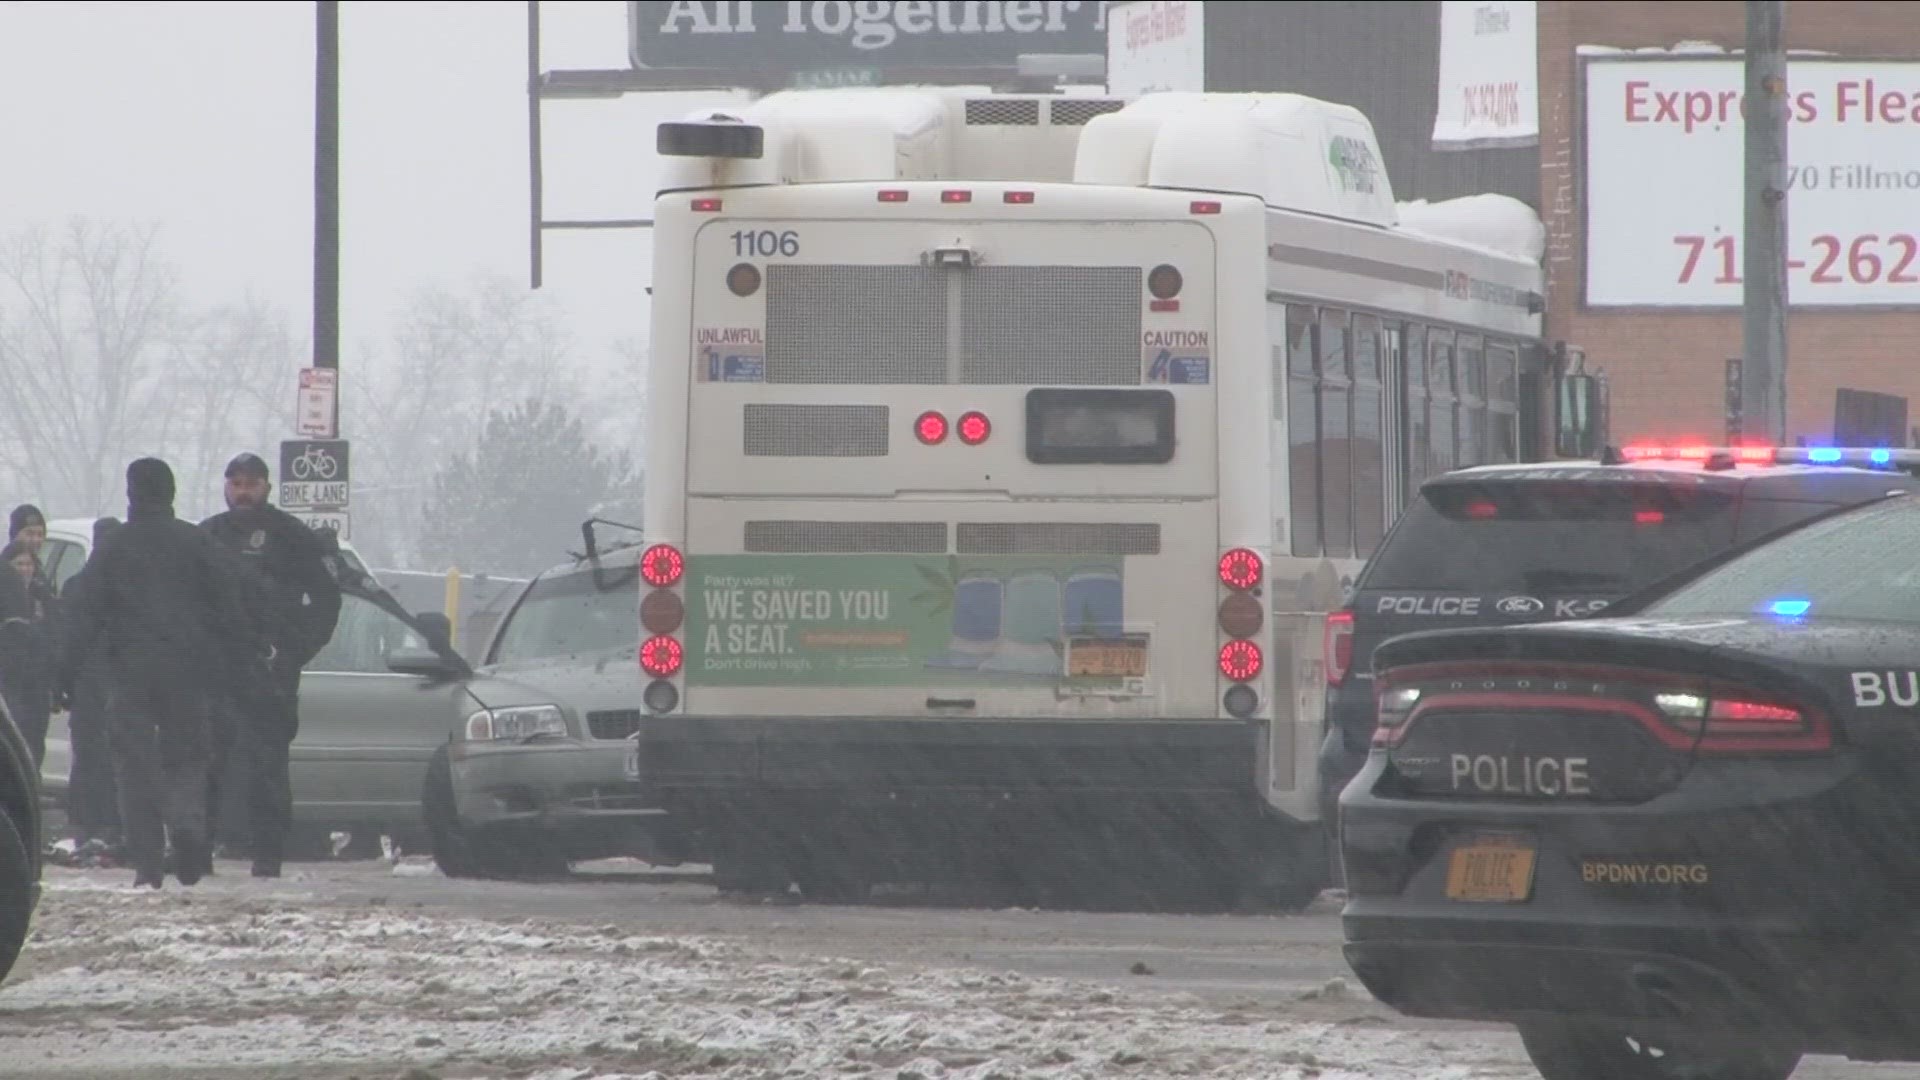 The NFTA Metro Bus and the car collided on Tuesday morning.